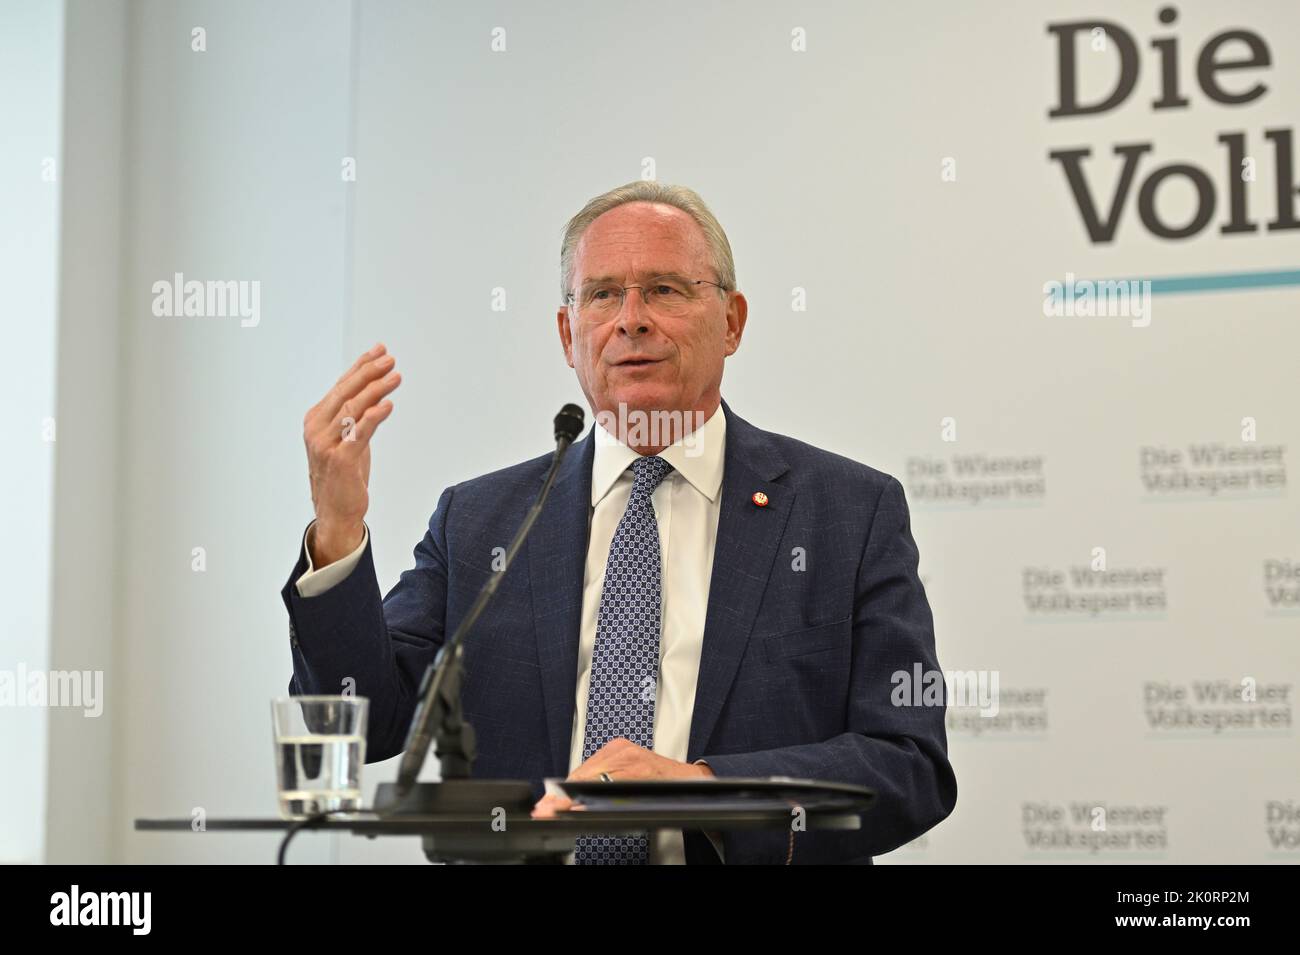 Vienna, Austria. 13th Sep, 2022. Press conference of the Vienna People's Party with state party chairman Karl Mahrer. Topic: News about the SPÖ financial scandal and news from the Vienna People's Party Stock Photo